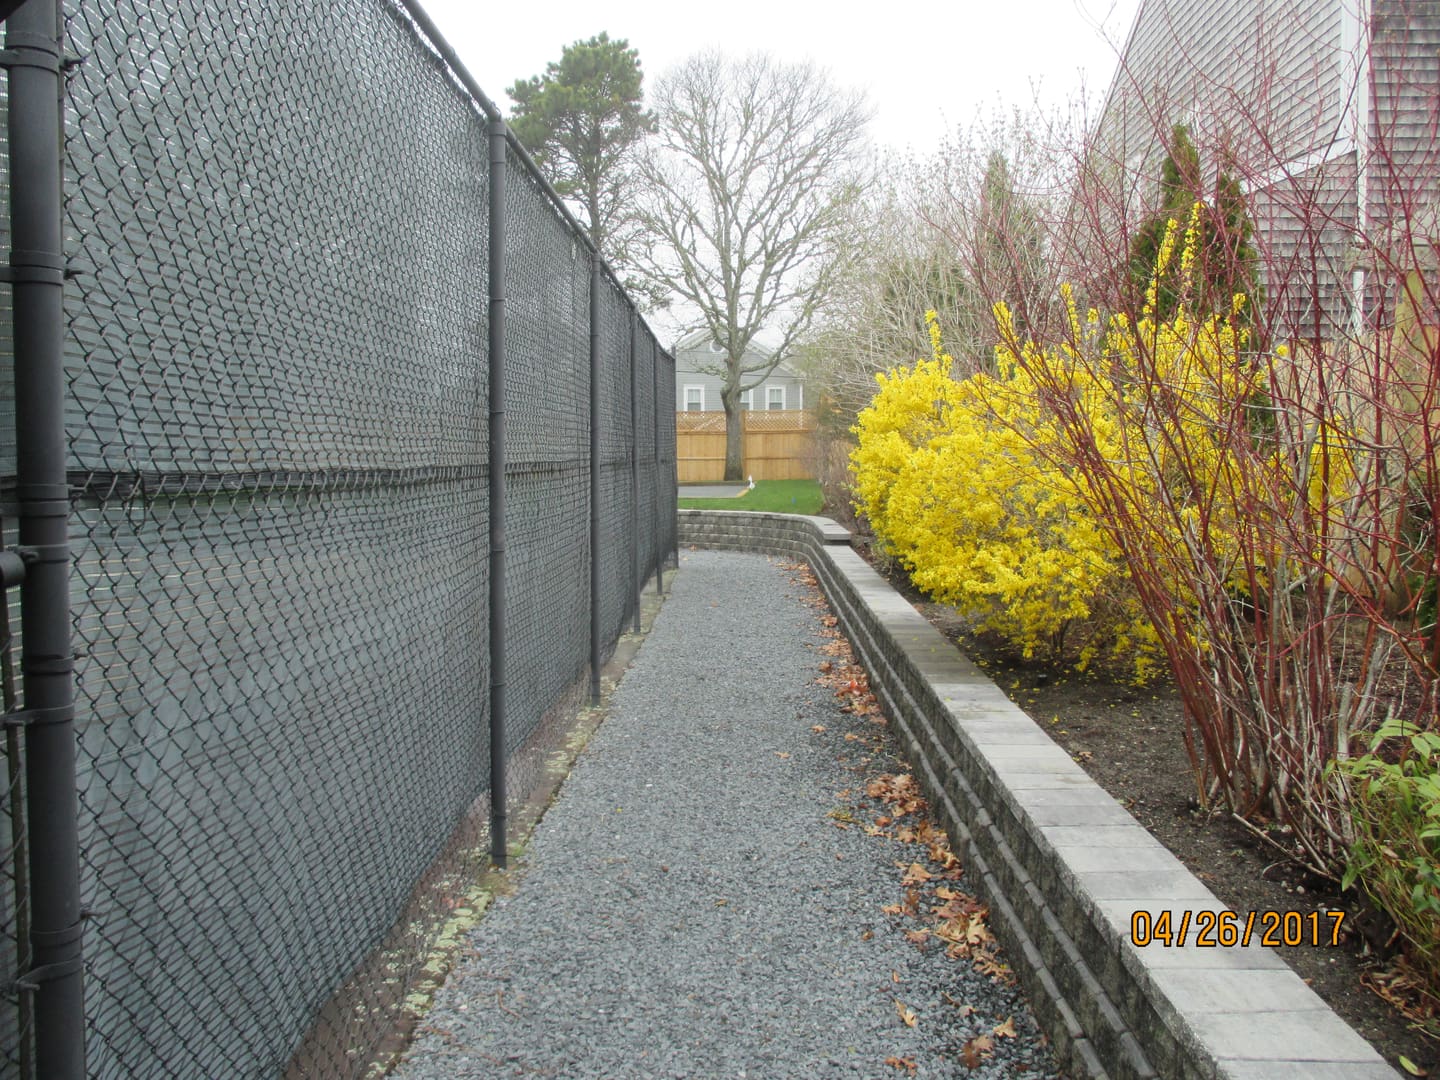 A walkway with a fence and bushes in the background.